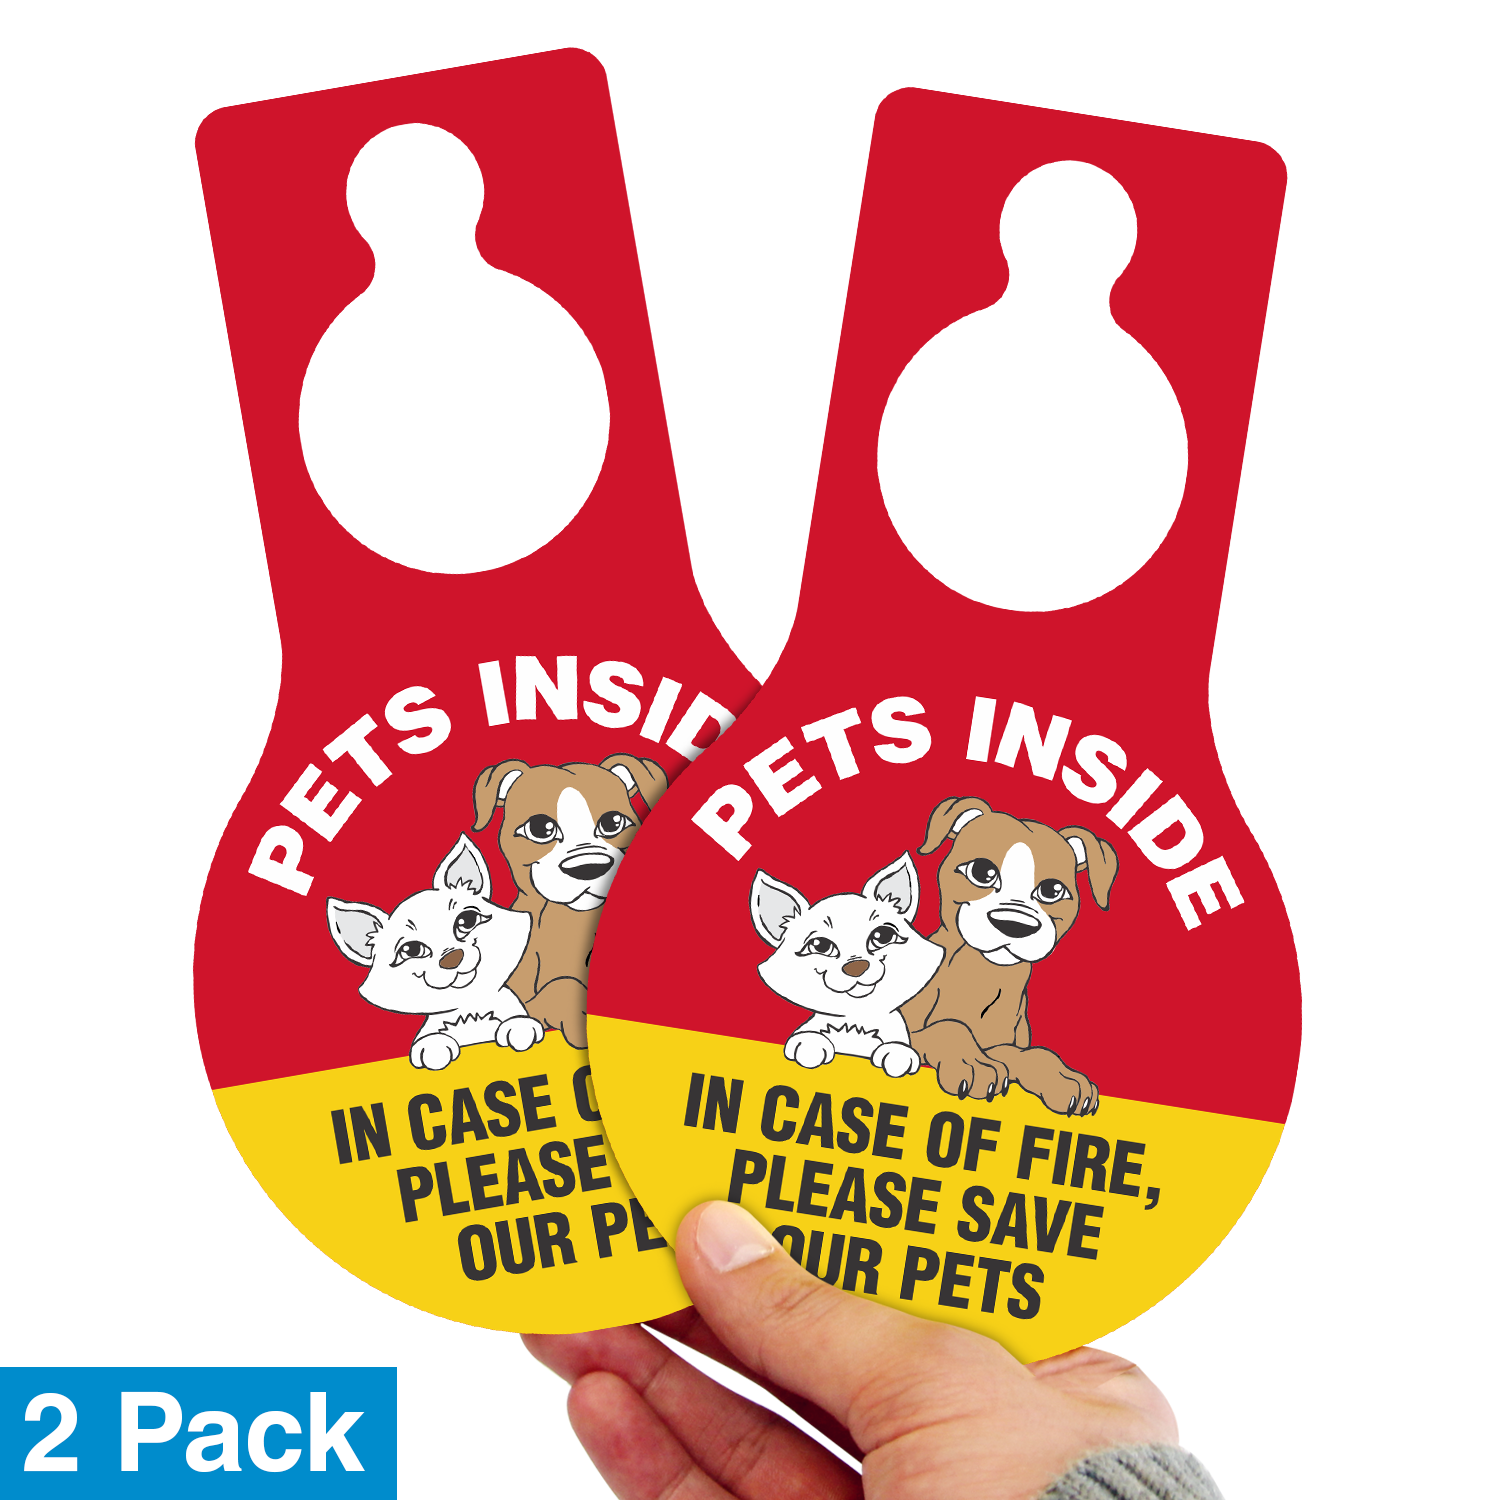 In case of fire, save pets hang tag